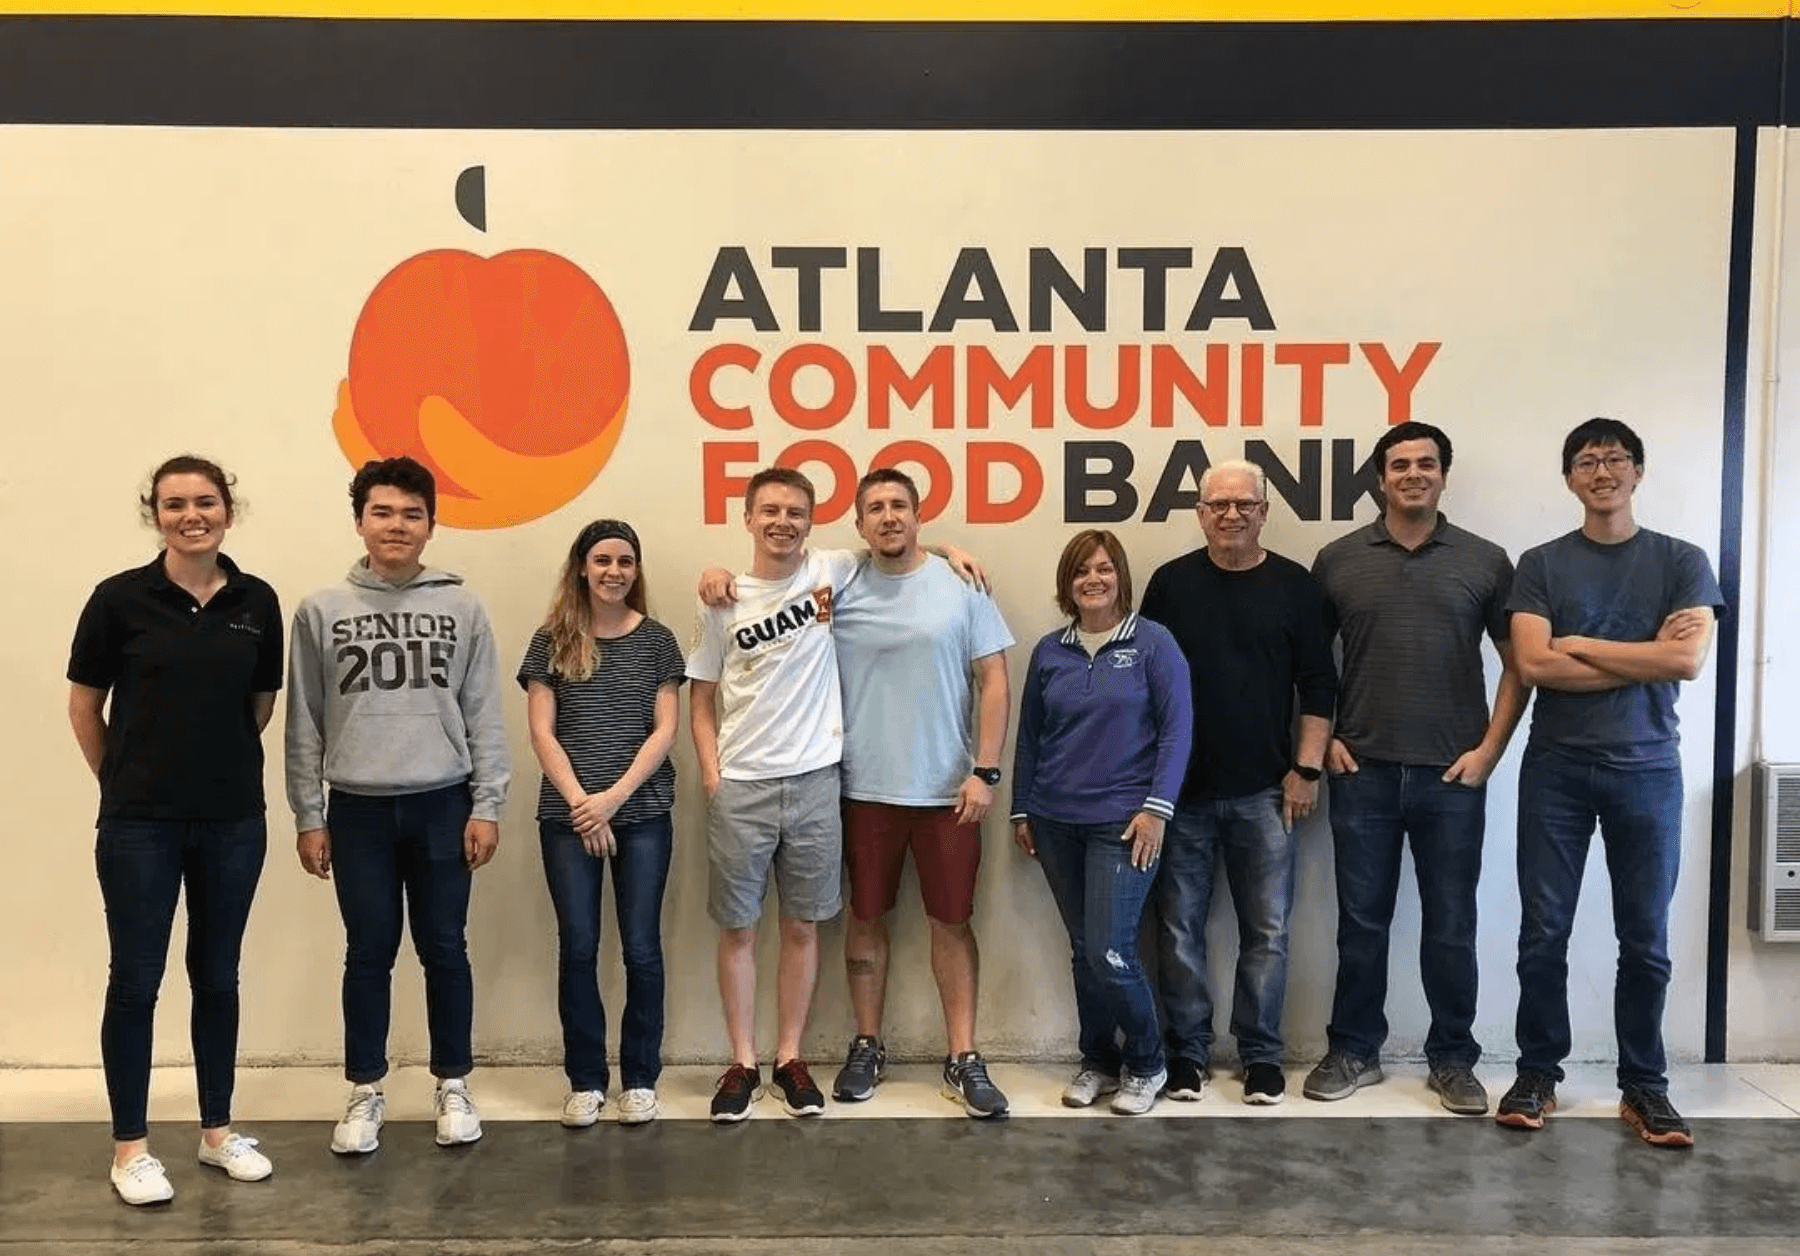 9 staff and volunteers at the Atlanta Community Food Bank posing in front of a sign with the organization's logo.